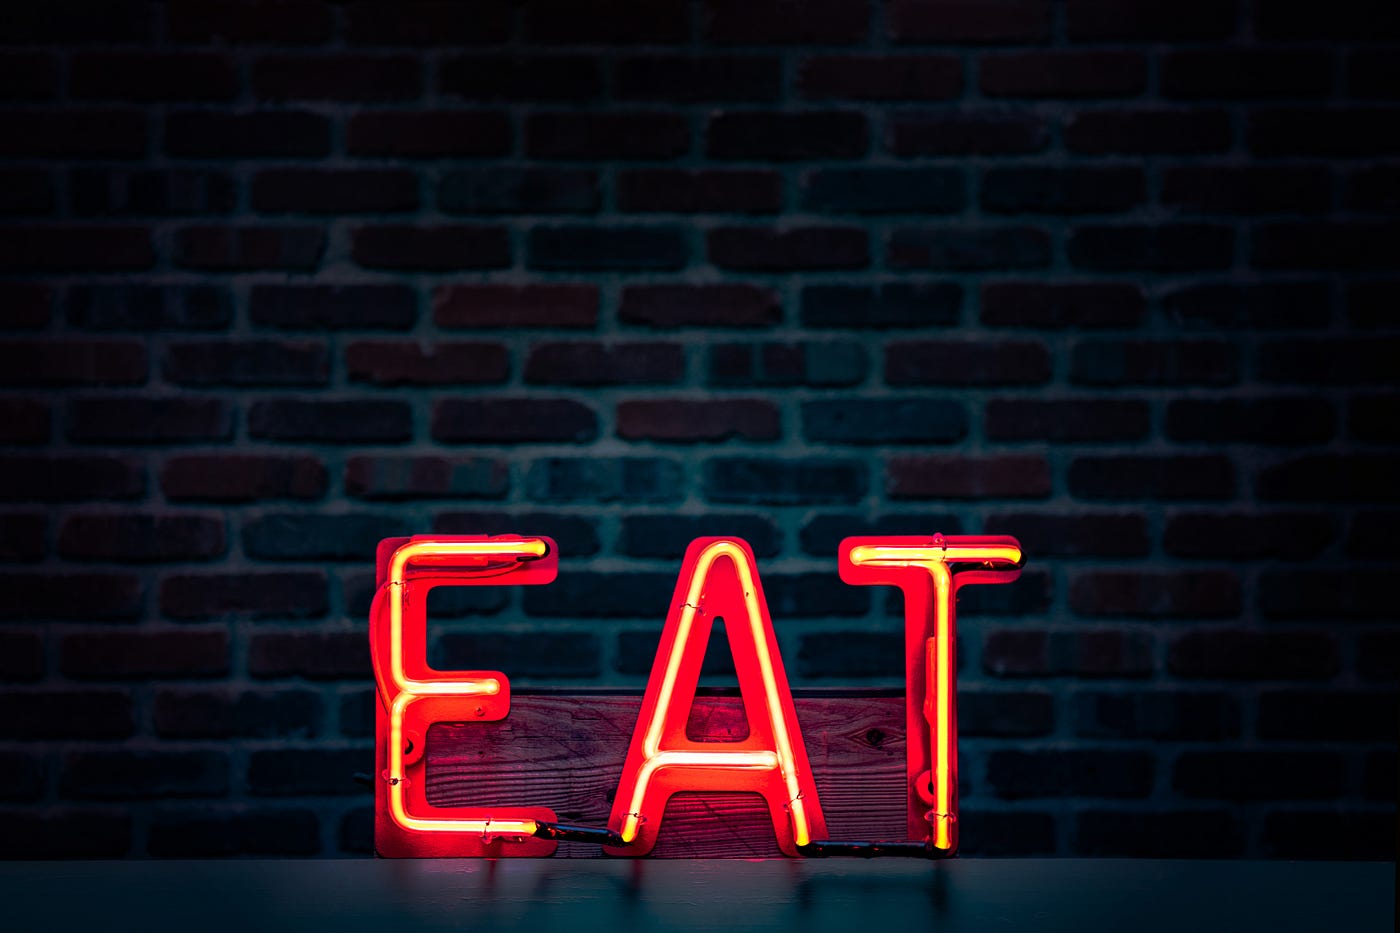 Red neon sign says “EAT” with a brick wall in the background. Inadequate sleep can lead to weight gain.